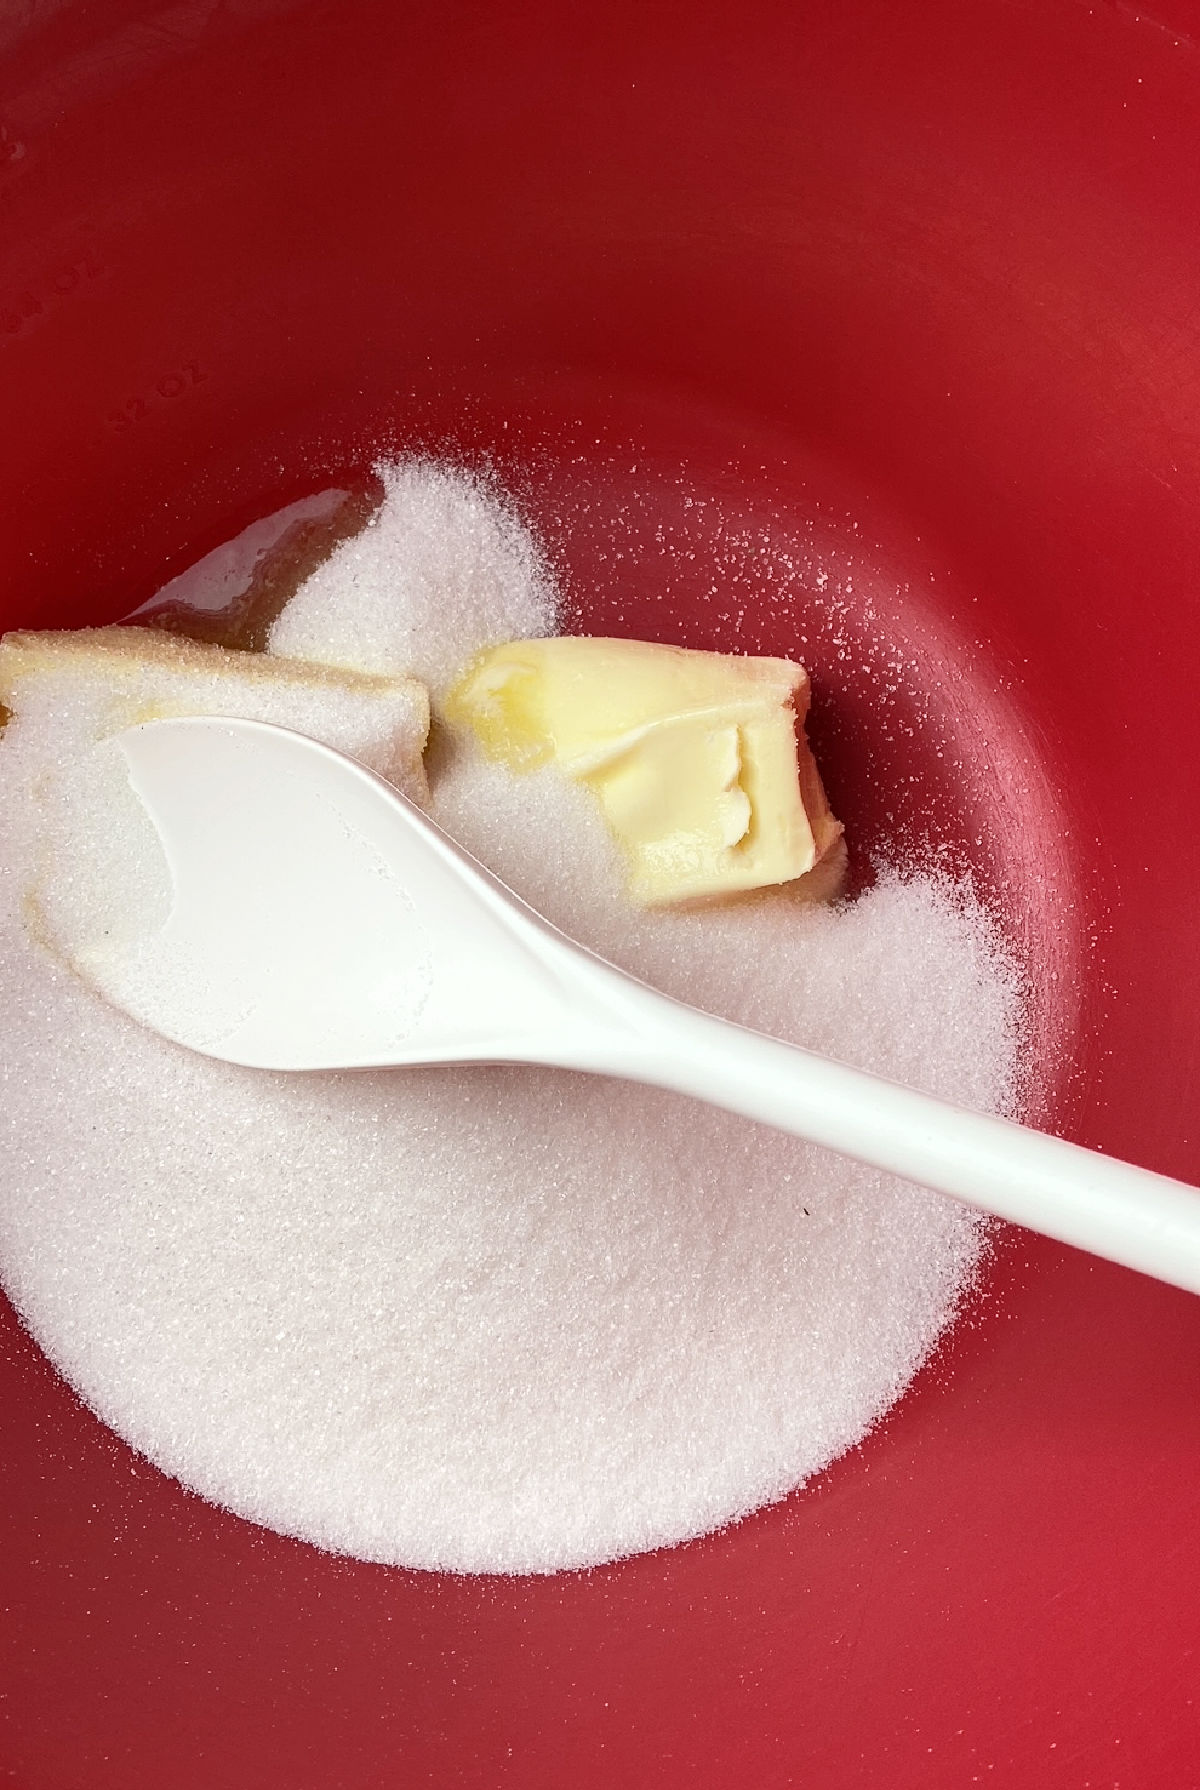 sugar and butter in a red bowl